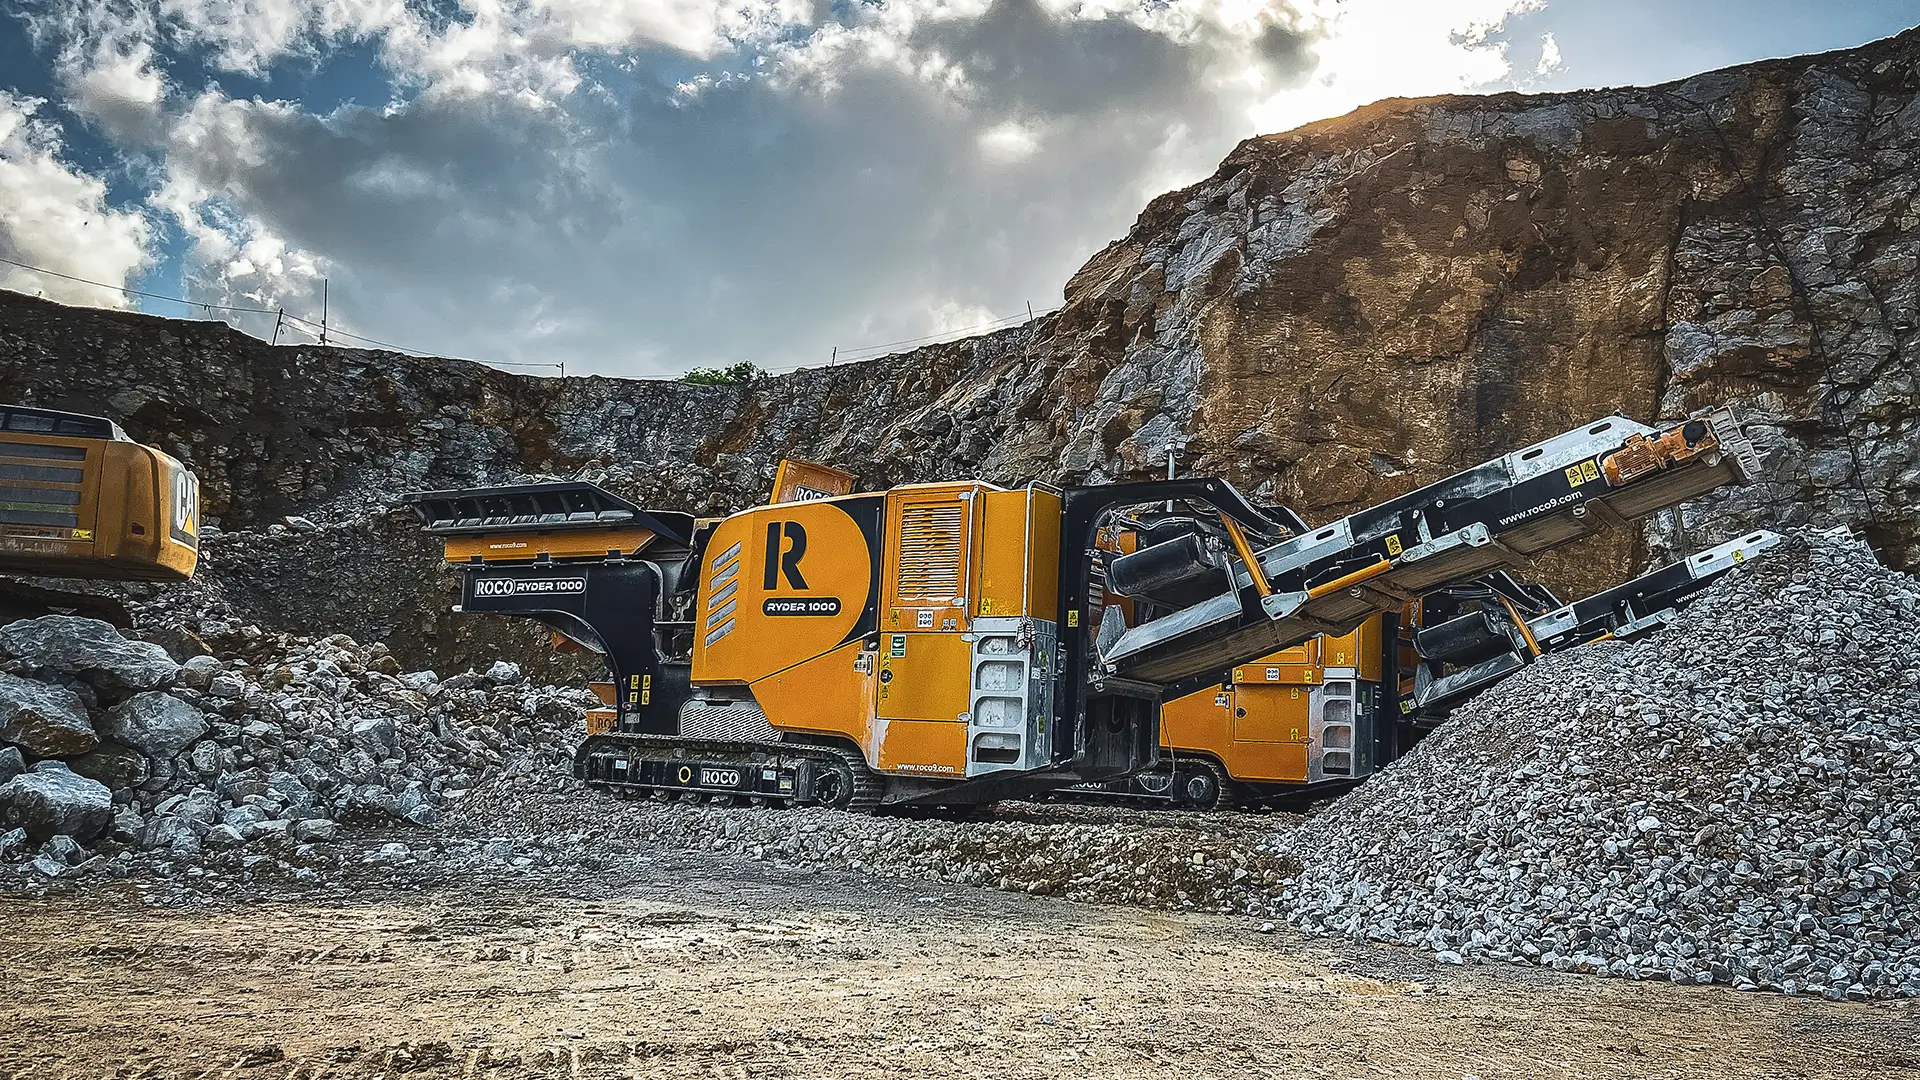 A black and amber Roco jaw crusher is working in a quarry, crushing large rocks.